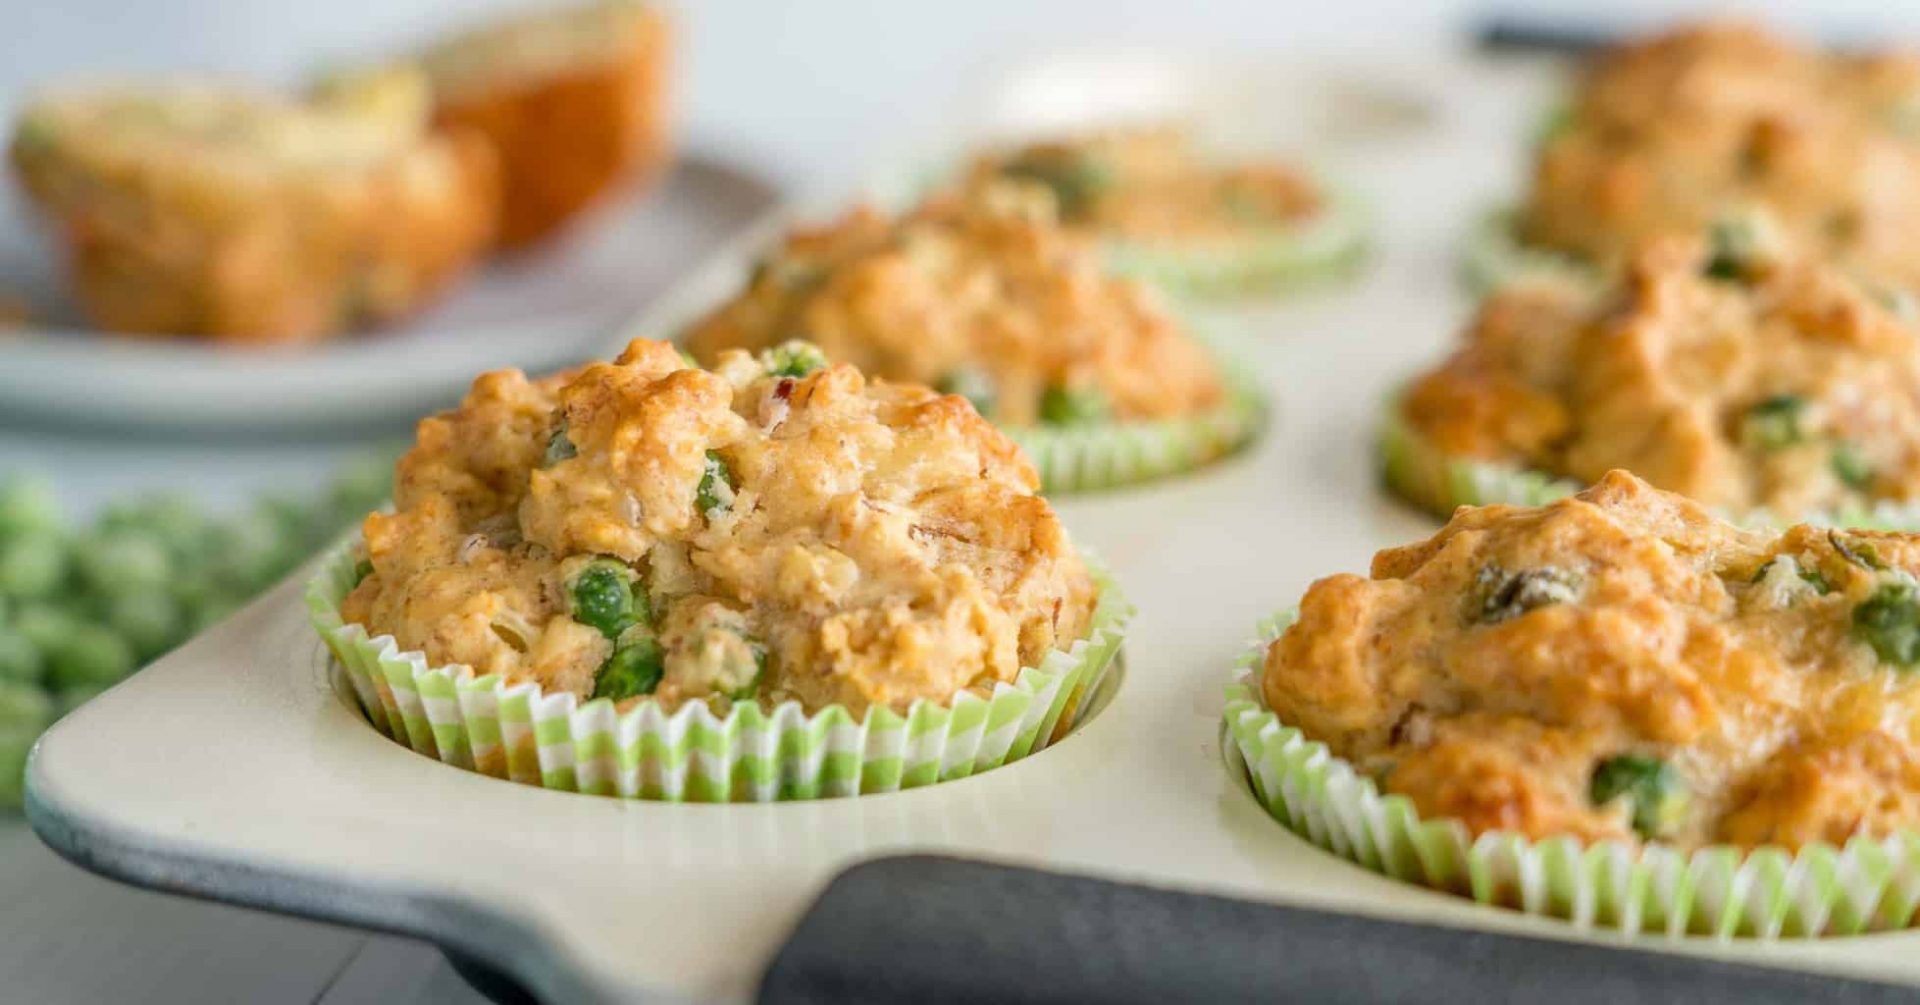 Peas Health Benefits - Salty Muffins with Peas and Bacon - Filmfoods